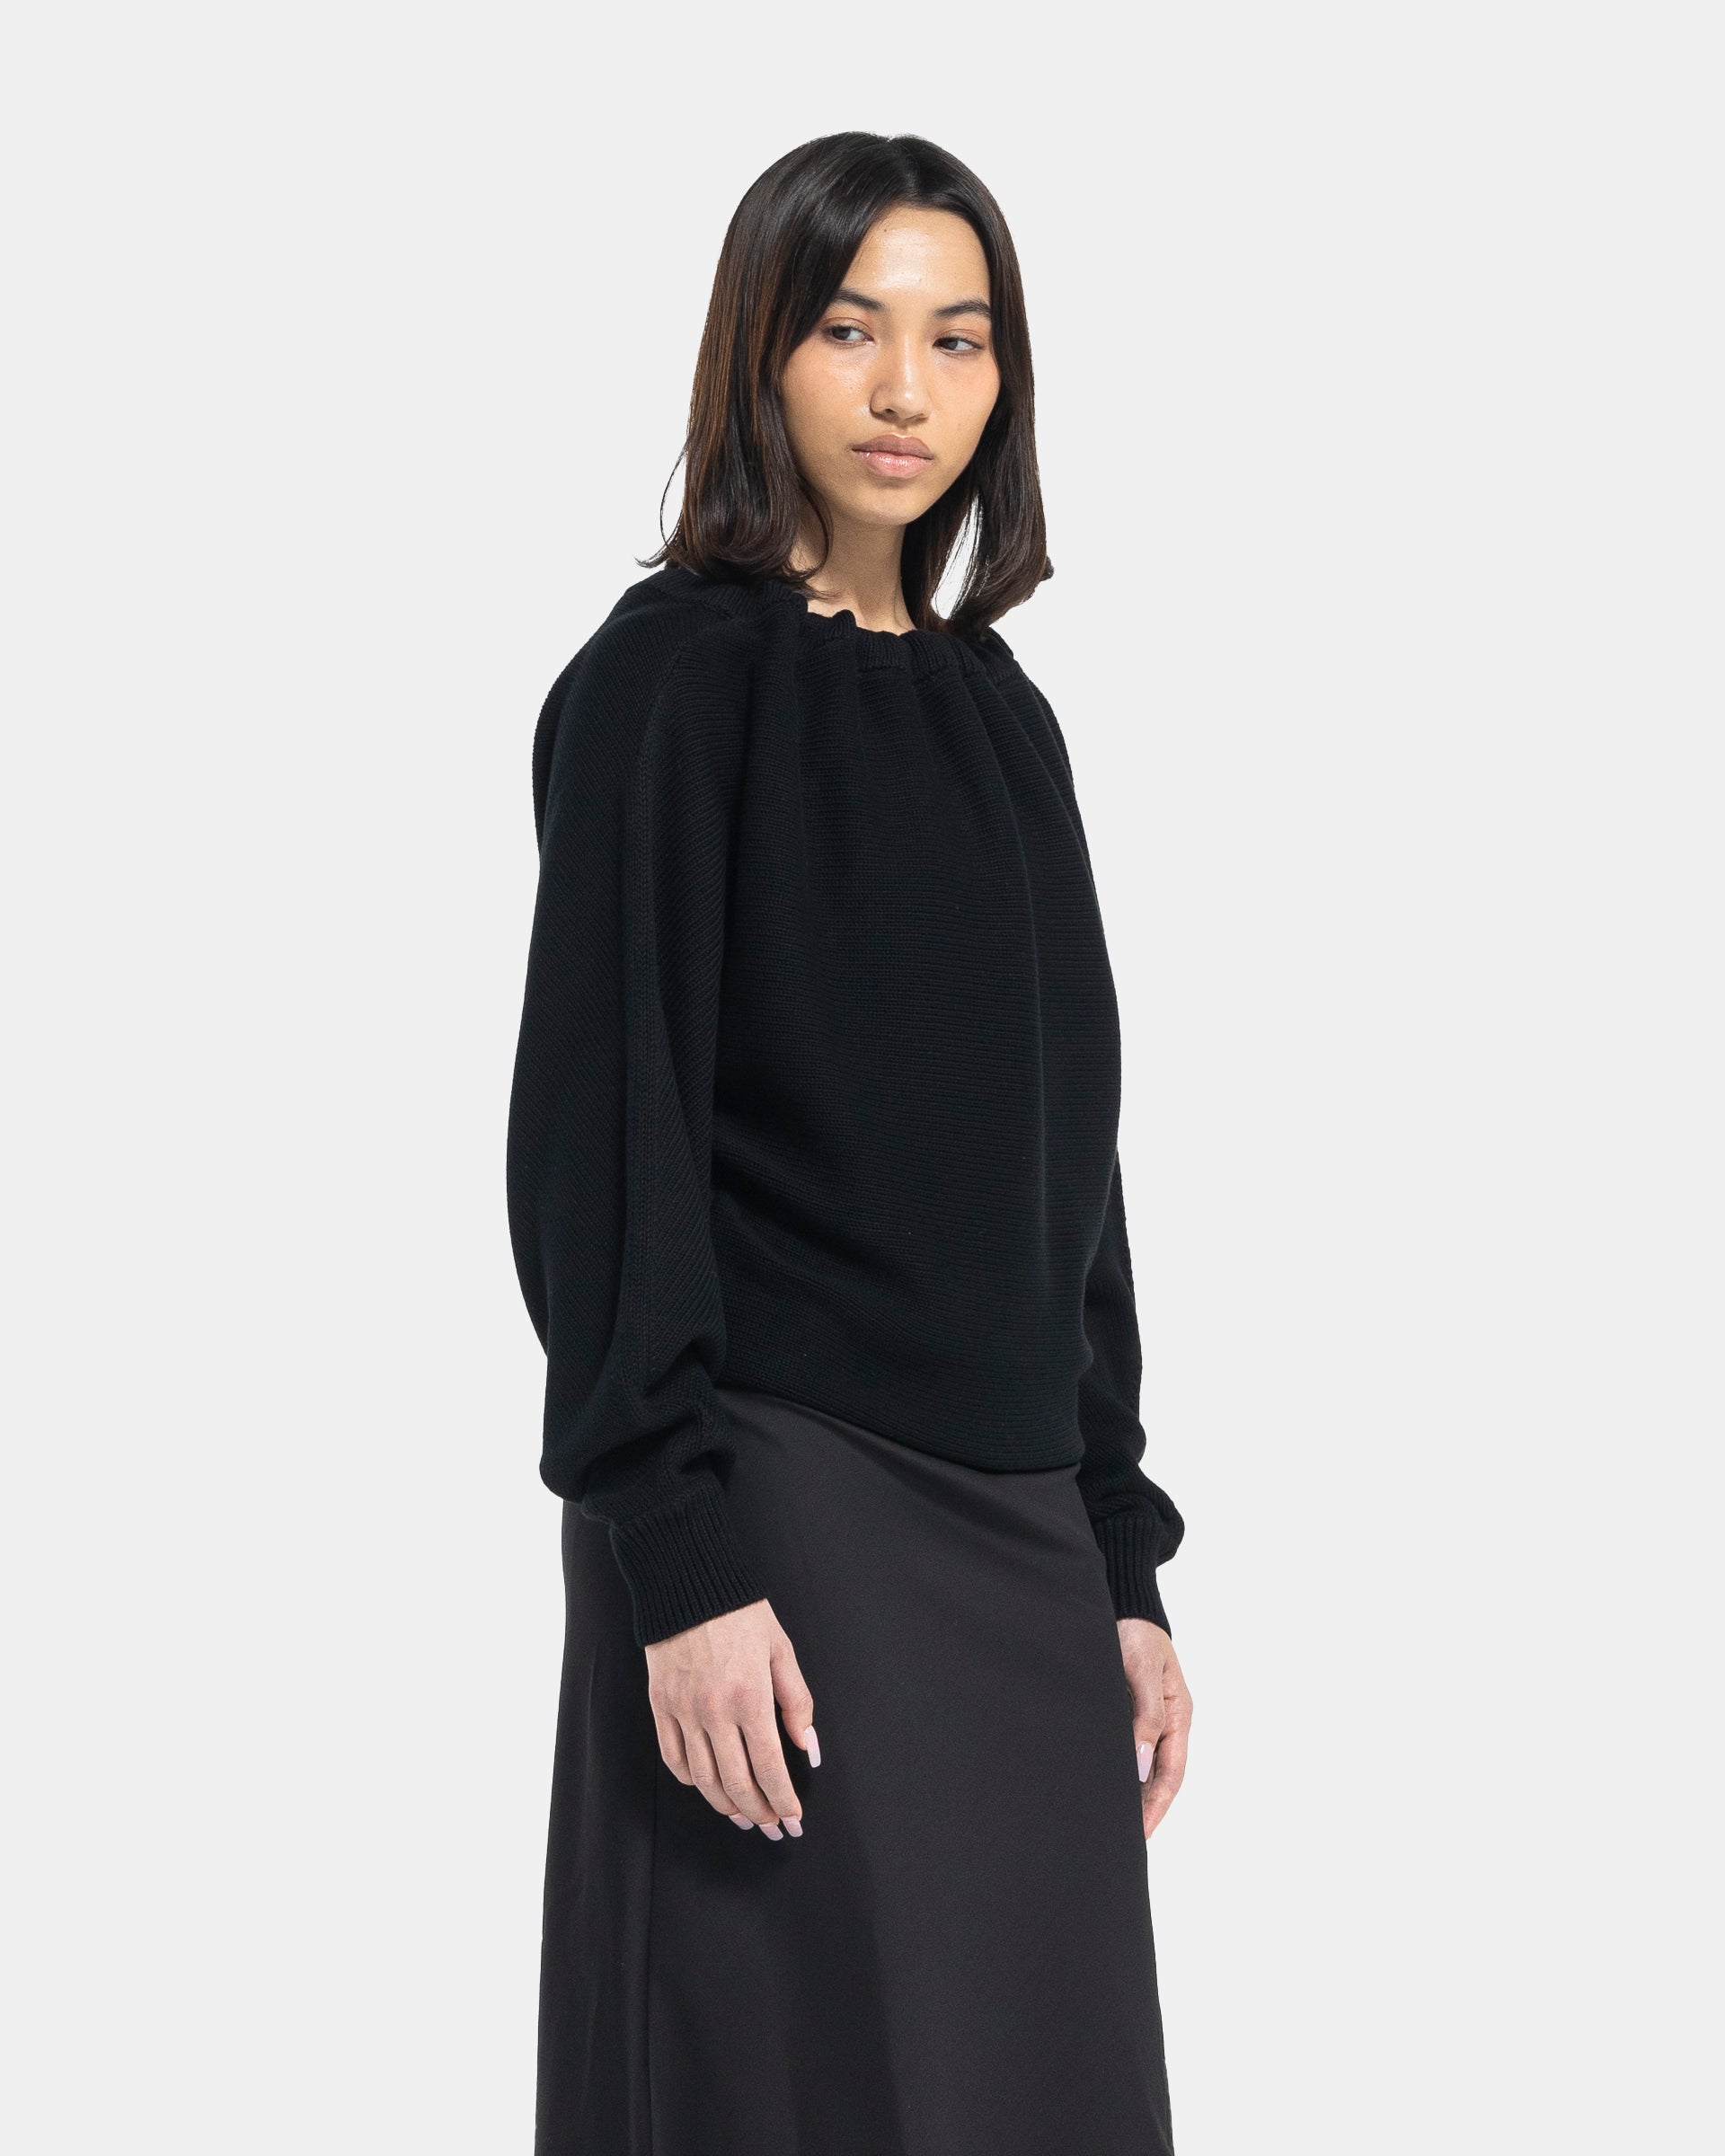 Ruched Dolman Sleeve Sweater in Black